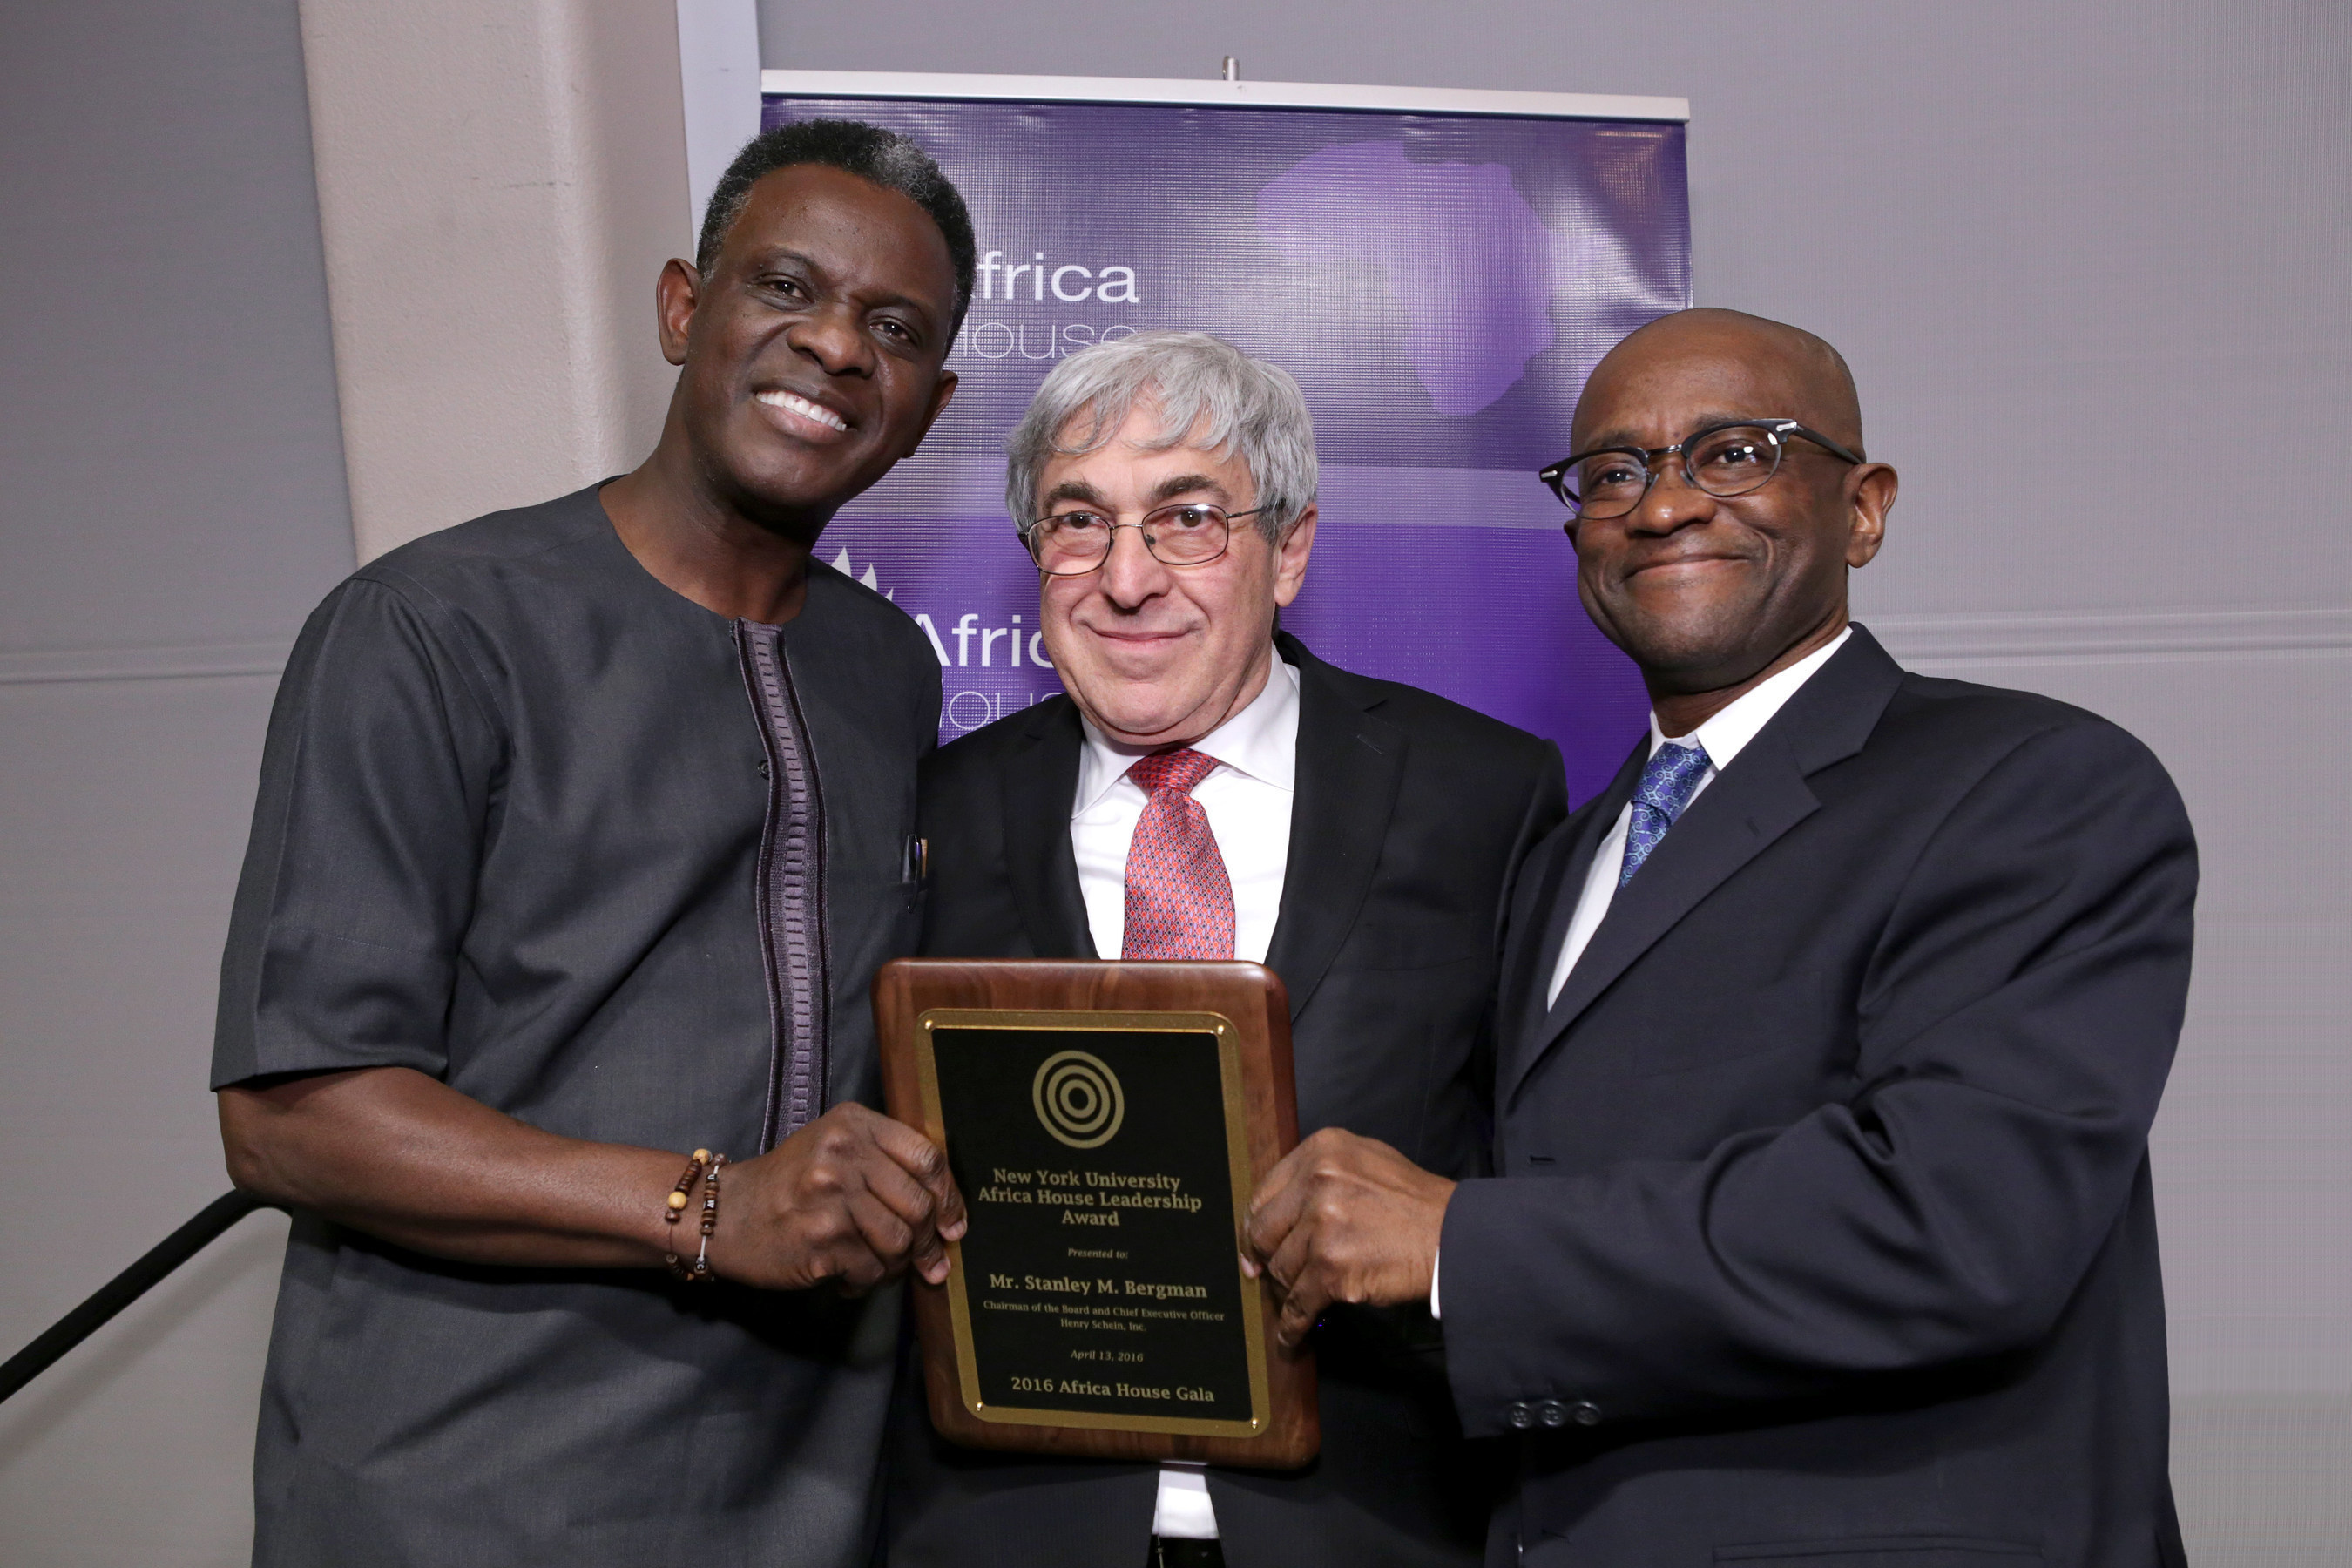 From left is Dr. Gbenga Ogedegbe, MD, MPH, FACP, Professor, Director, Division of Health and Behavior, Department of Population Health, NYU School of Medicine, Vice Dean, NYU College of Global Public Health; Stanley M. Bergman, Chairman of the Board and Chief Executive Officer of Henry Schein, Inc.; and Dr. Yaw Nyarko, Founding Director of Africa House, Director of NYU's Center for Technology and Economic Development, Co-Director of the Development Research Institute, and Professor of Economics at NYU.